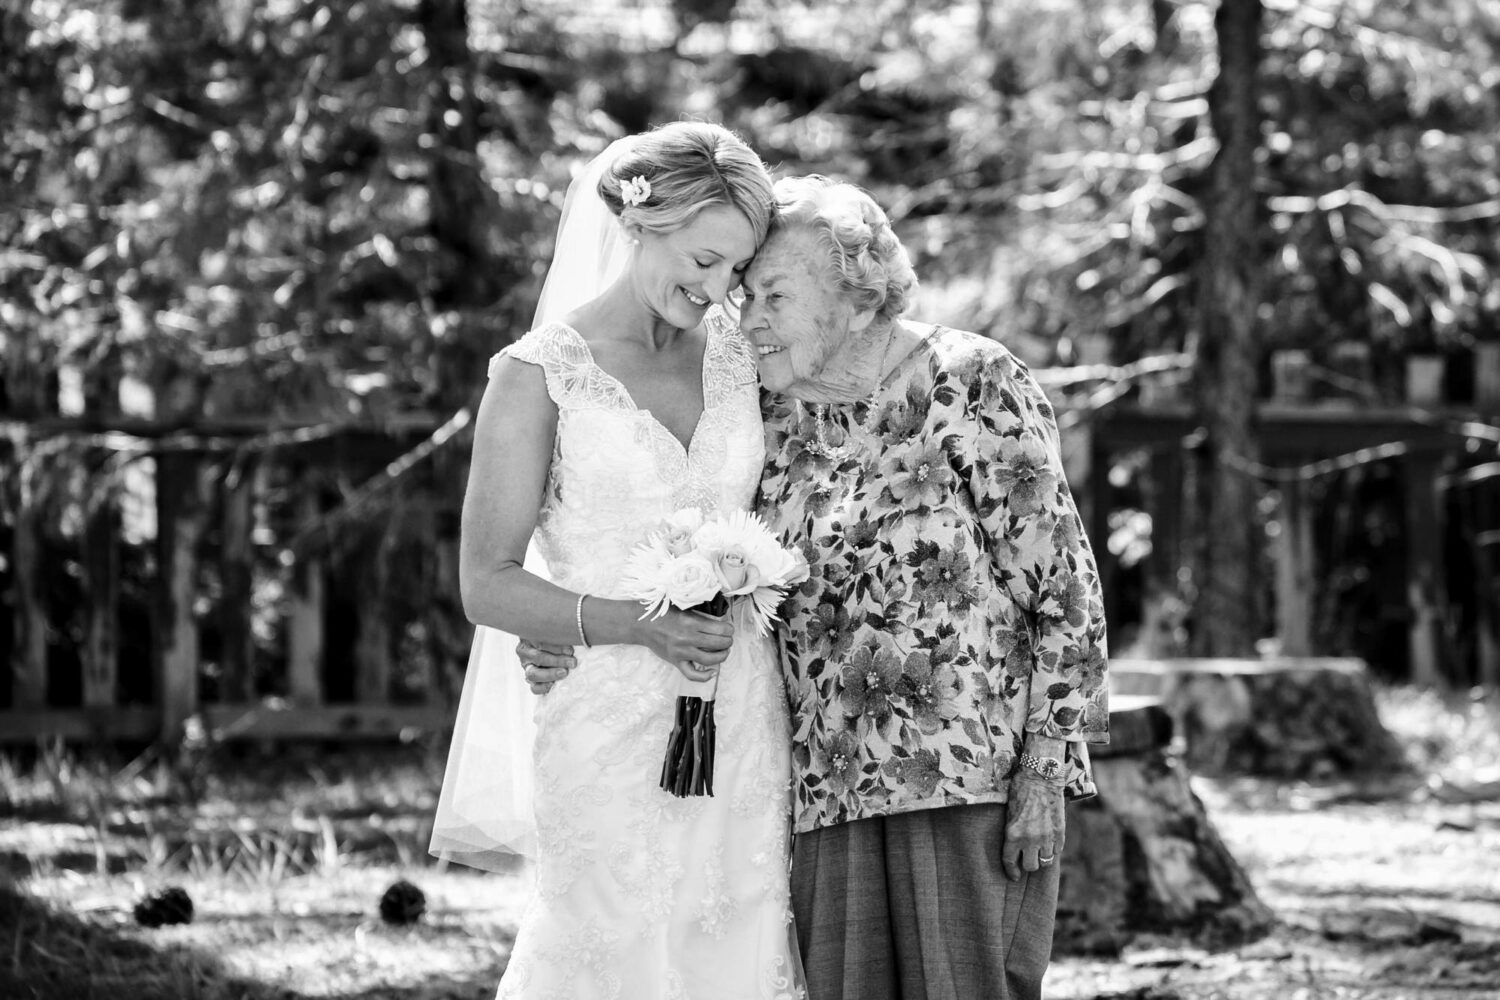 A bride and her grandmother share a heartwarming moment, captured by Lake Tahoe photographer Chris Werner.